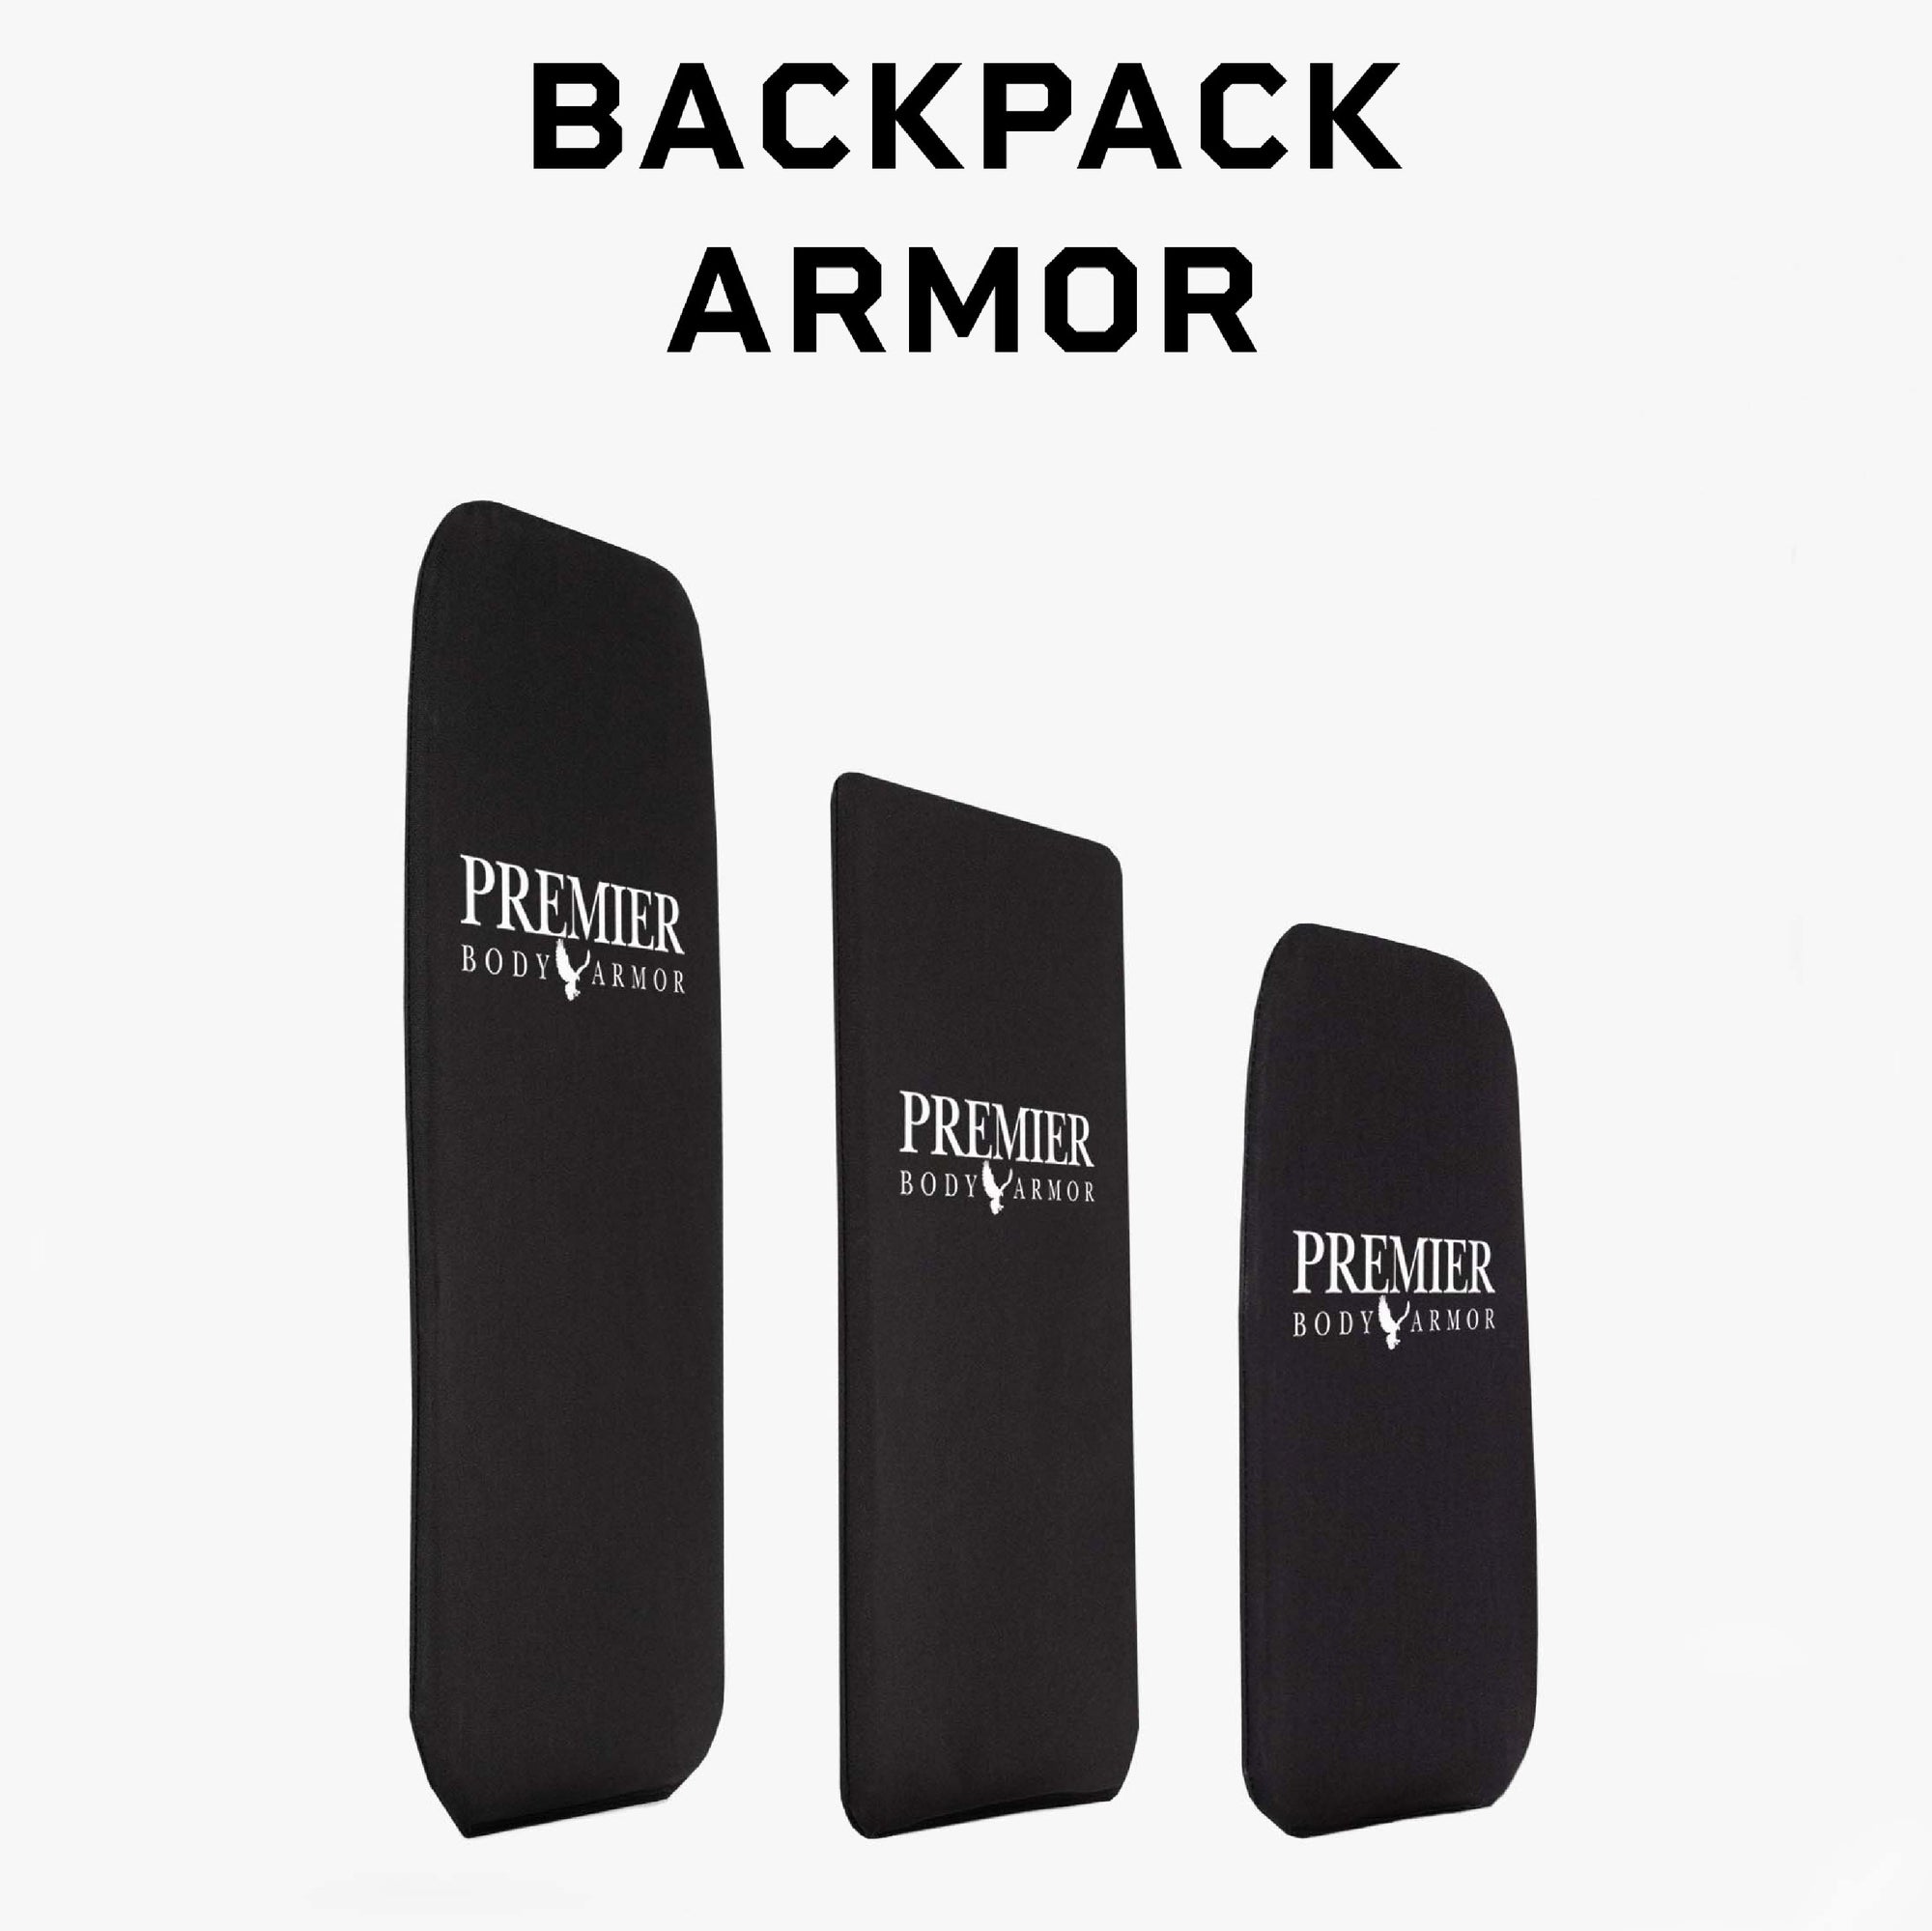 Premier Body armor creates bulletproof backpack armor for nearly every bookbag on the market. Our level 3a body armor is made in the USA. These level IIIA ballistic panels are the thinnest, best lightweight ballistic protection for anywhere you go!